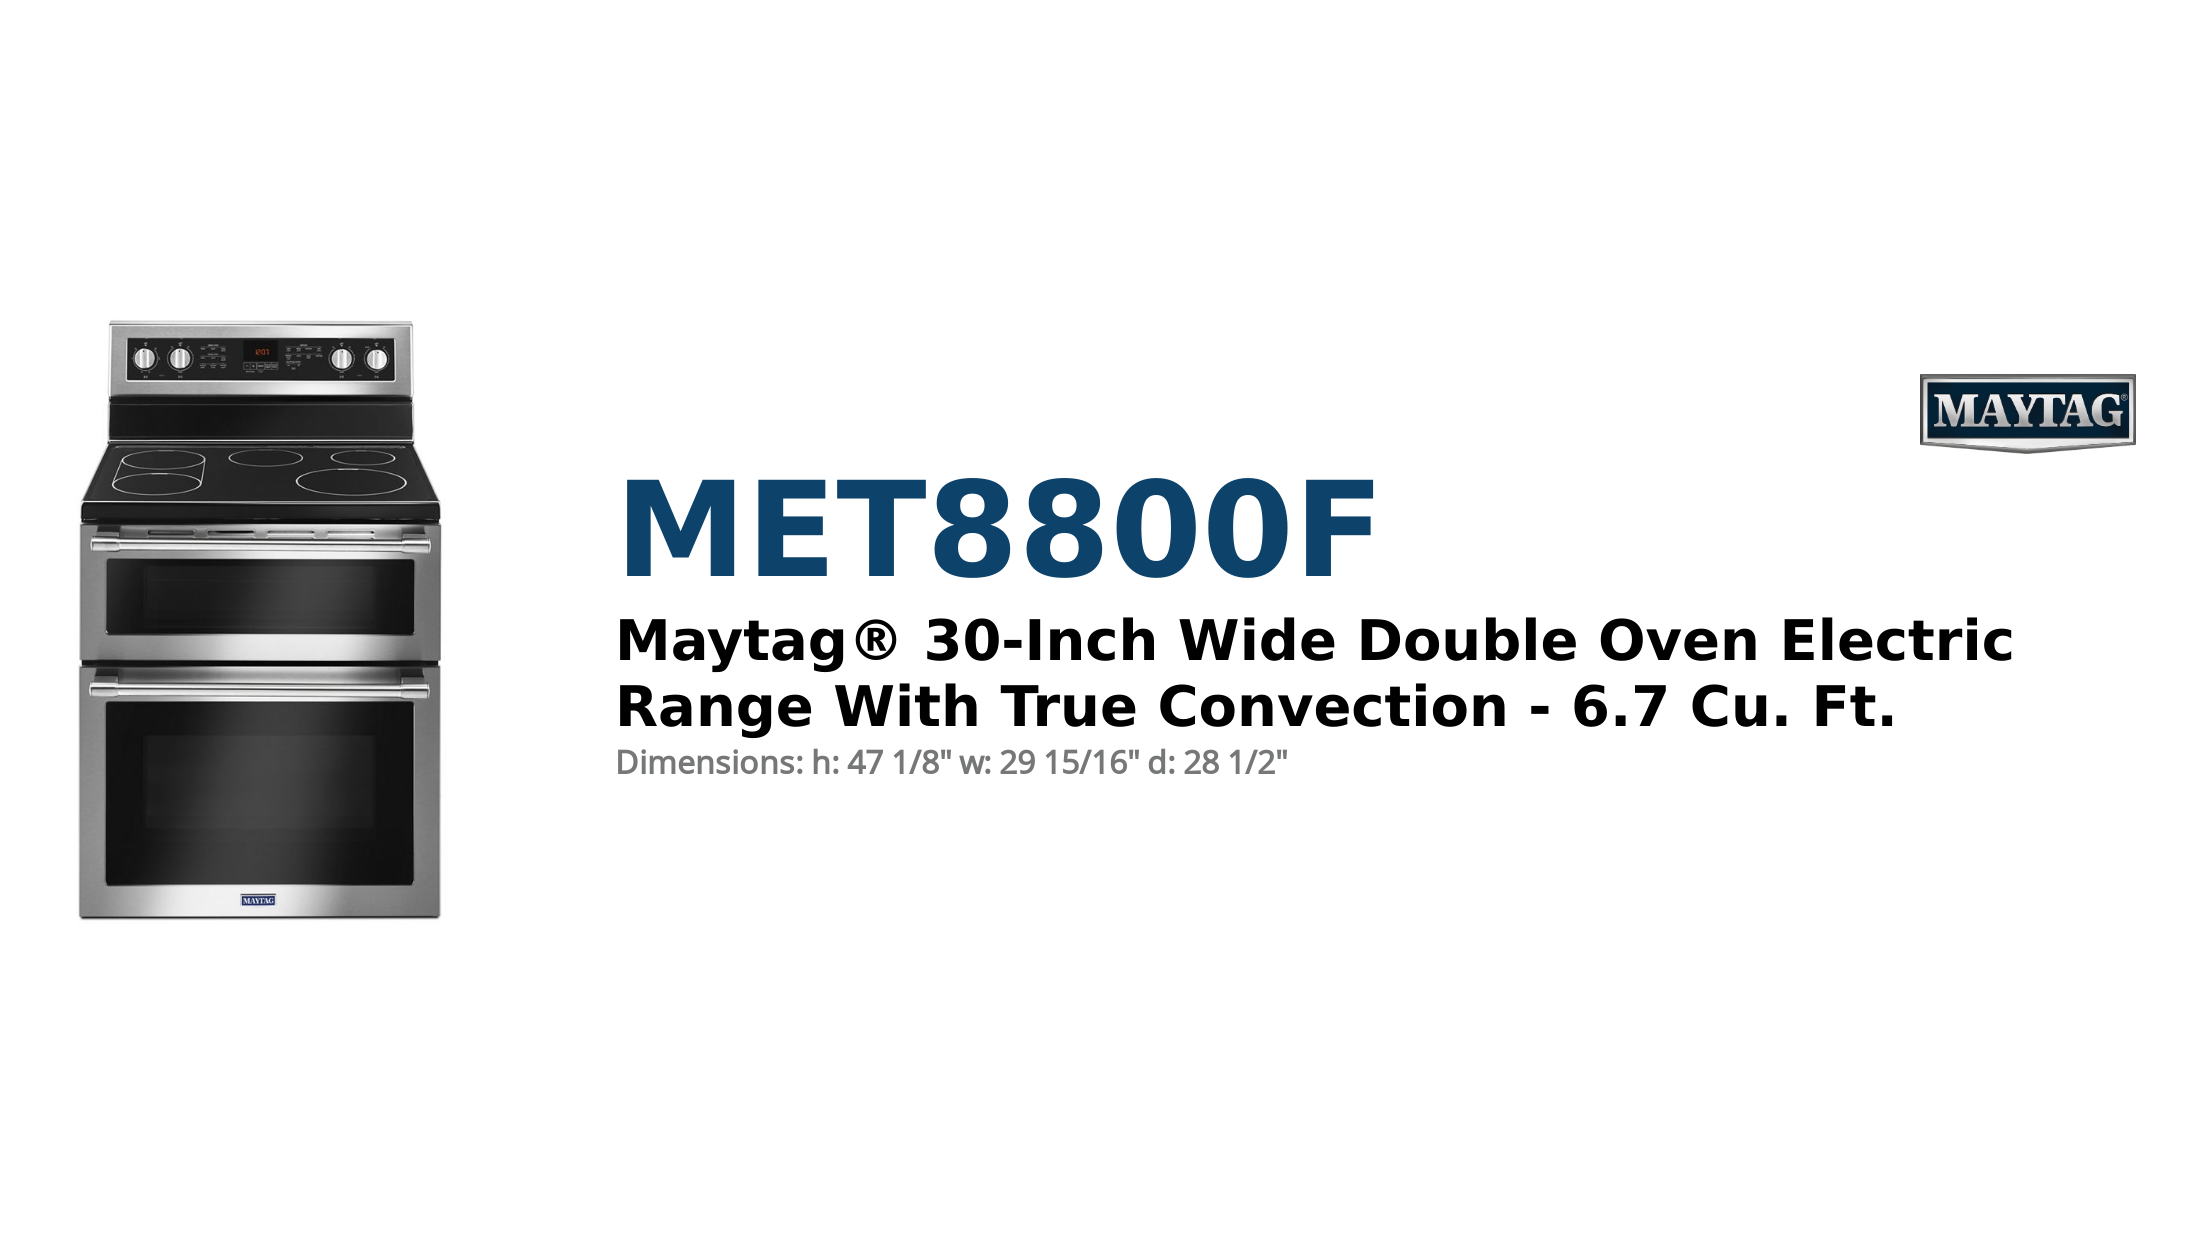 Maytag® 30-Inch Wide Double Oven Electric Range With True Convection - 6.7 Cu. Ft.